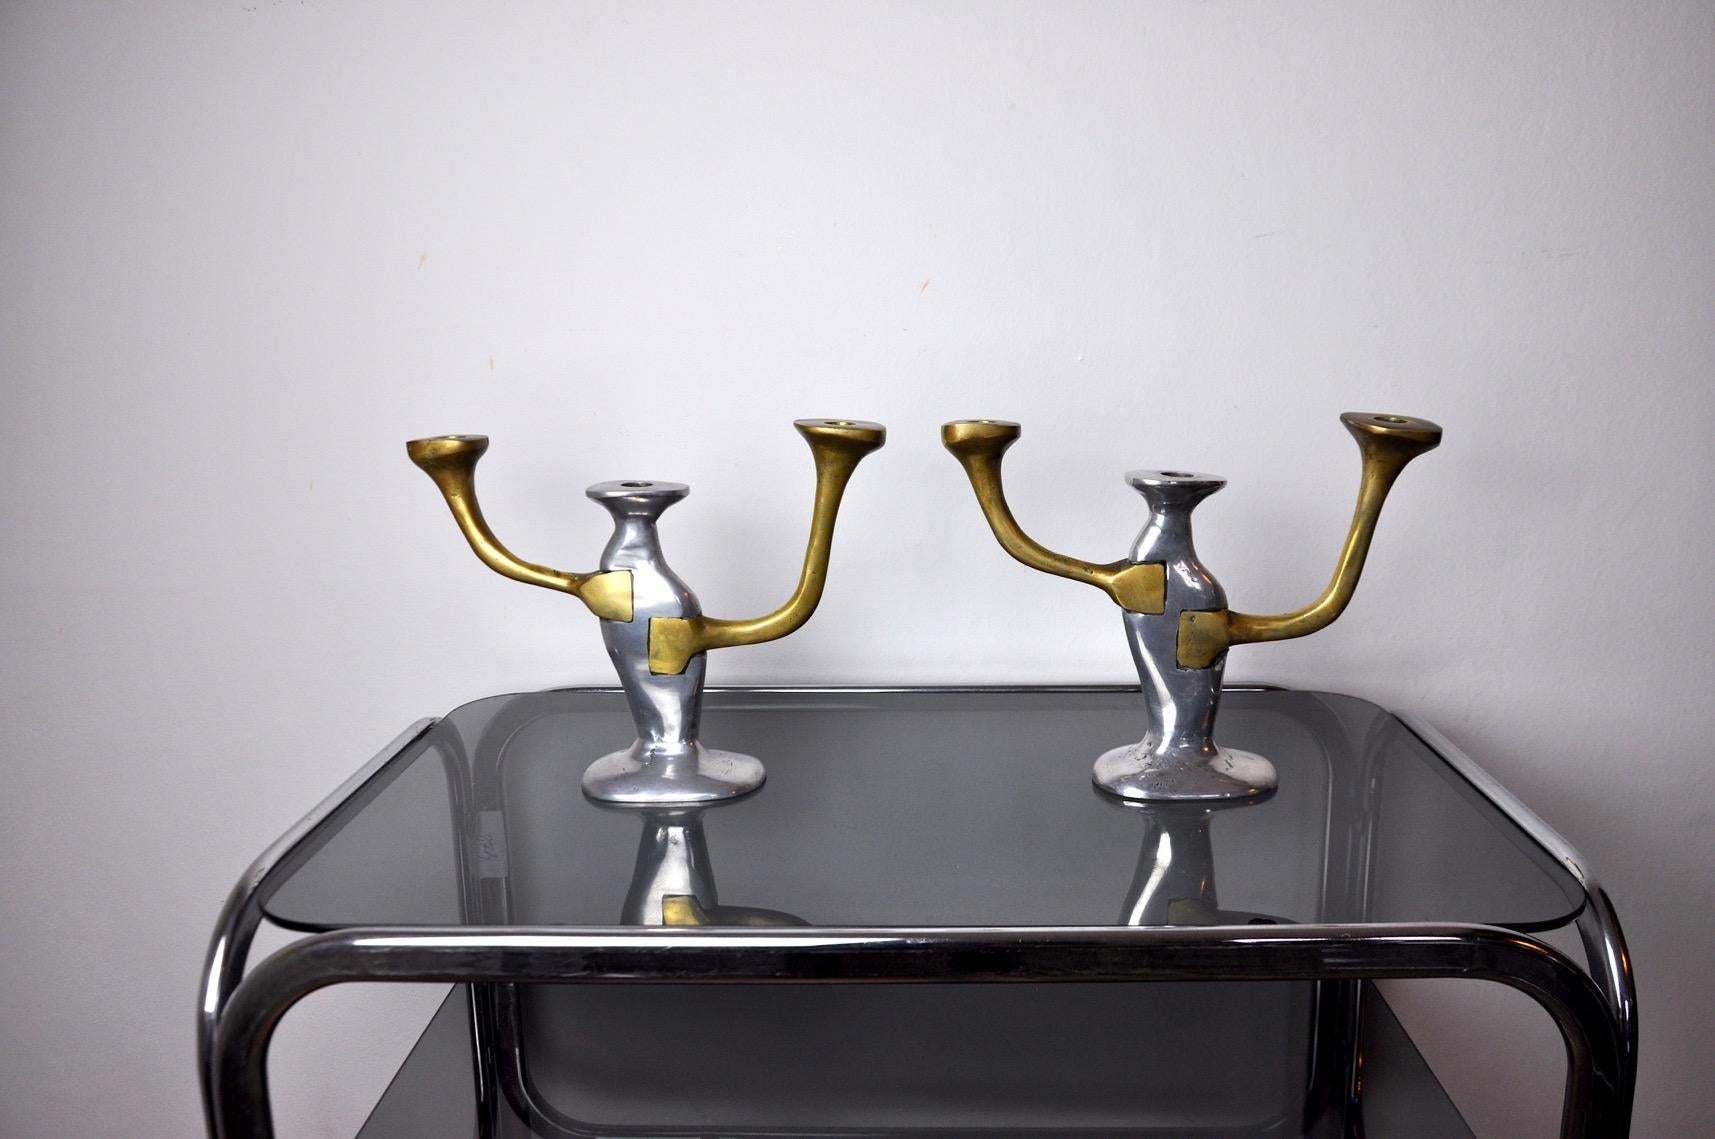 Rare and superb pair of Brutalist candlesticks designed and made by artist david marshall in the 80s, spain. Brass and aluminum structure. A true work of art and design object that will decorate your interior wonderfully. Very nice patina. 

 